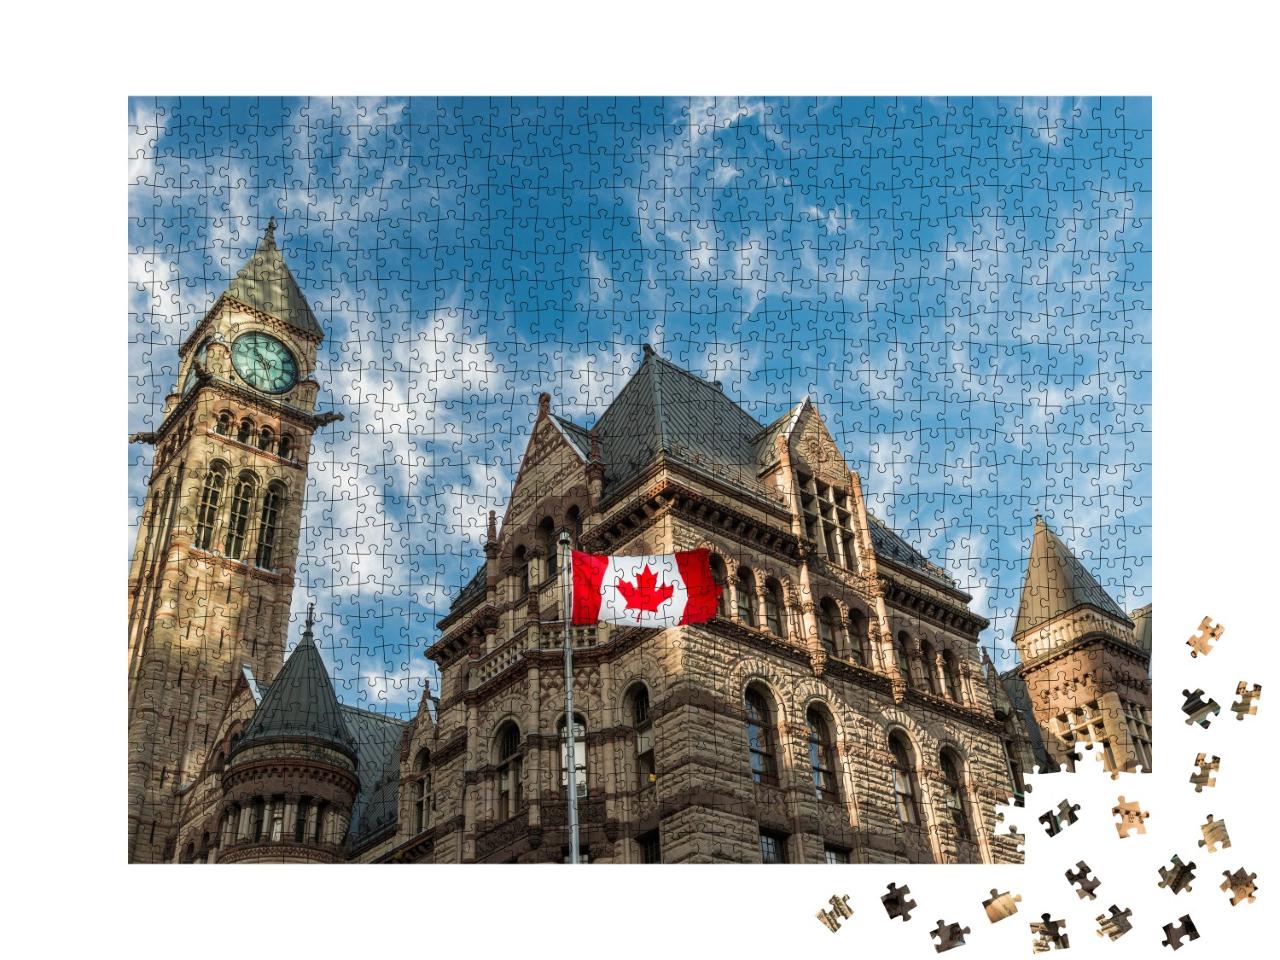 Puzzle 1000 Teile „Old City Hall in Toronto, Kanada“